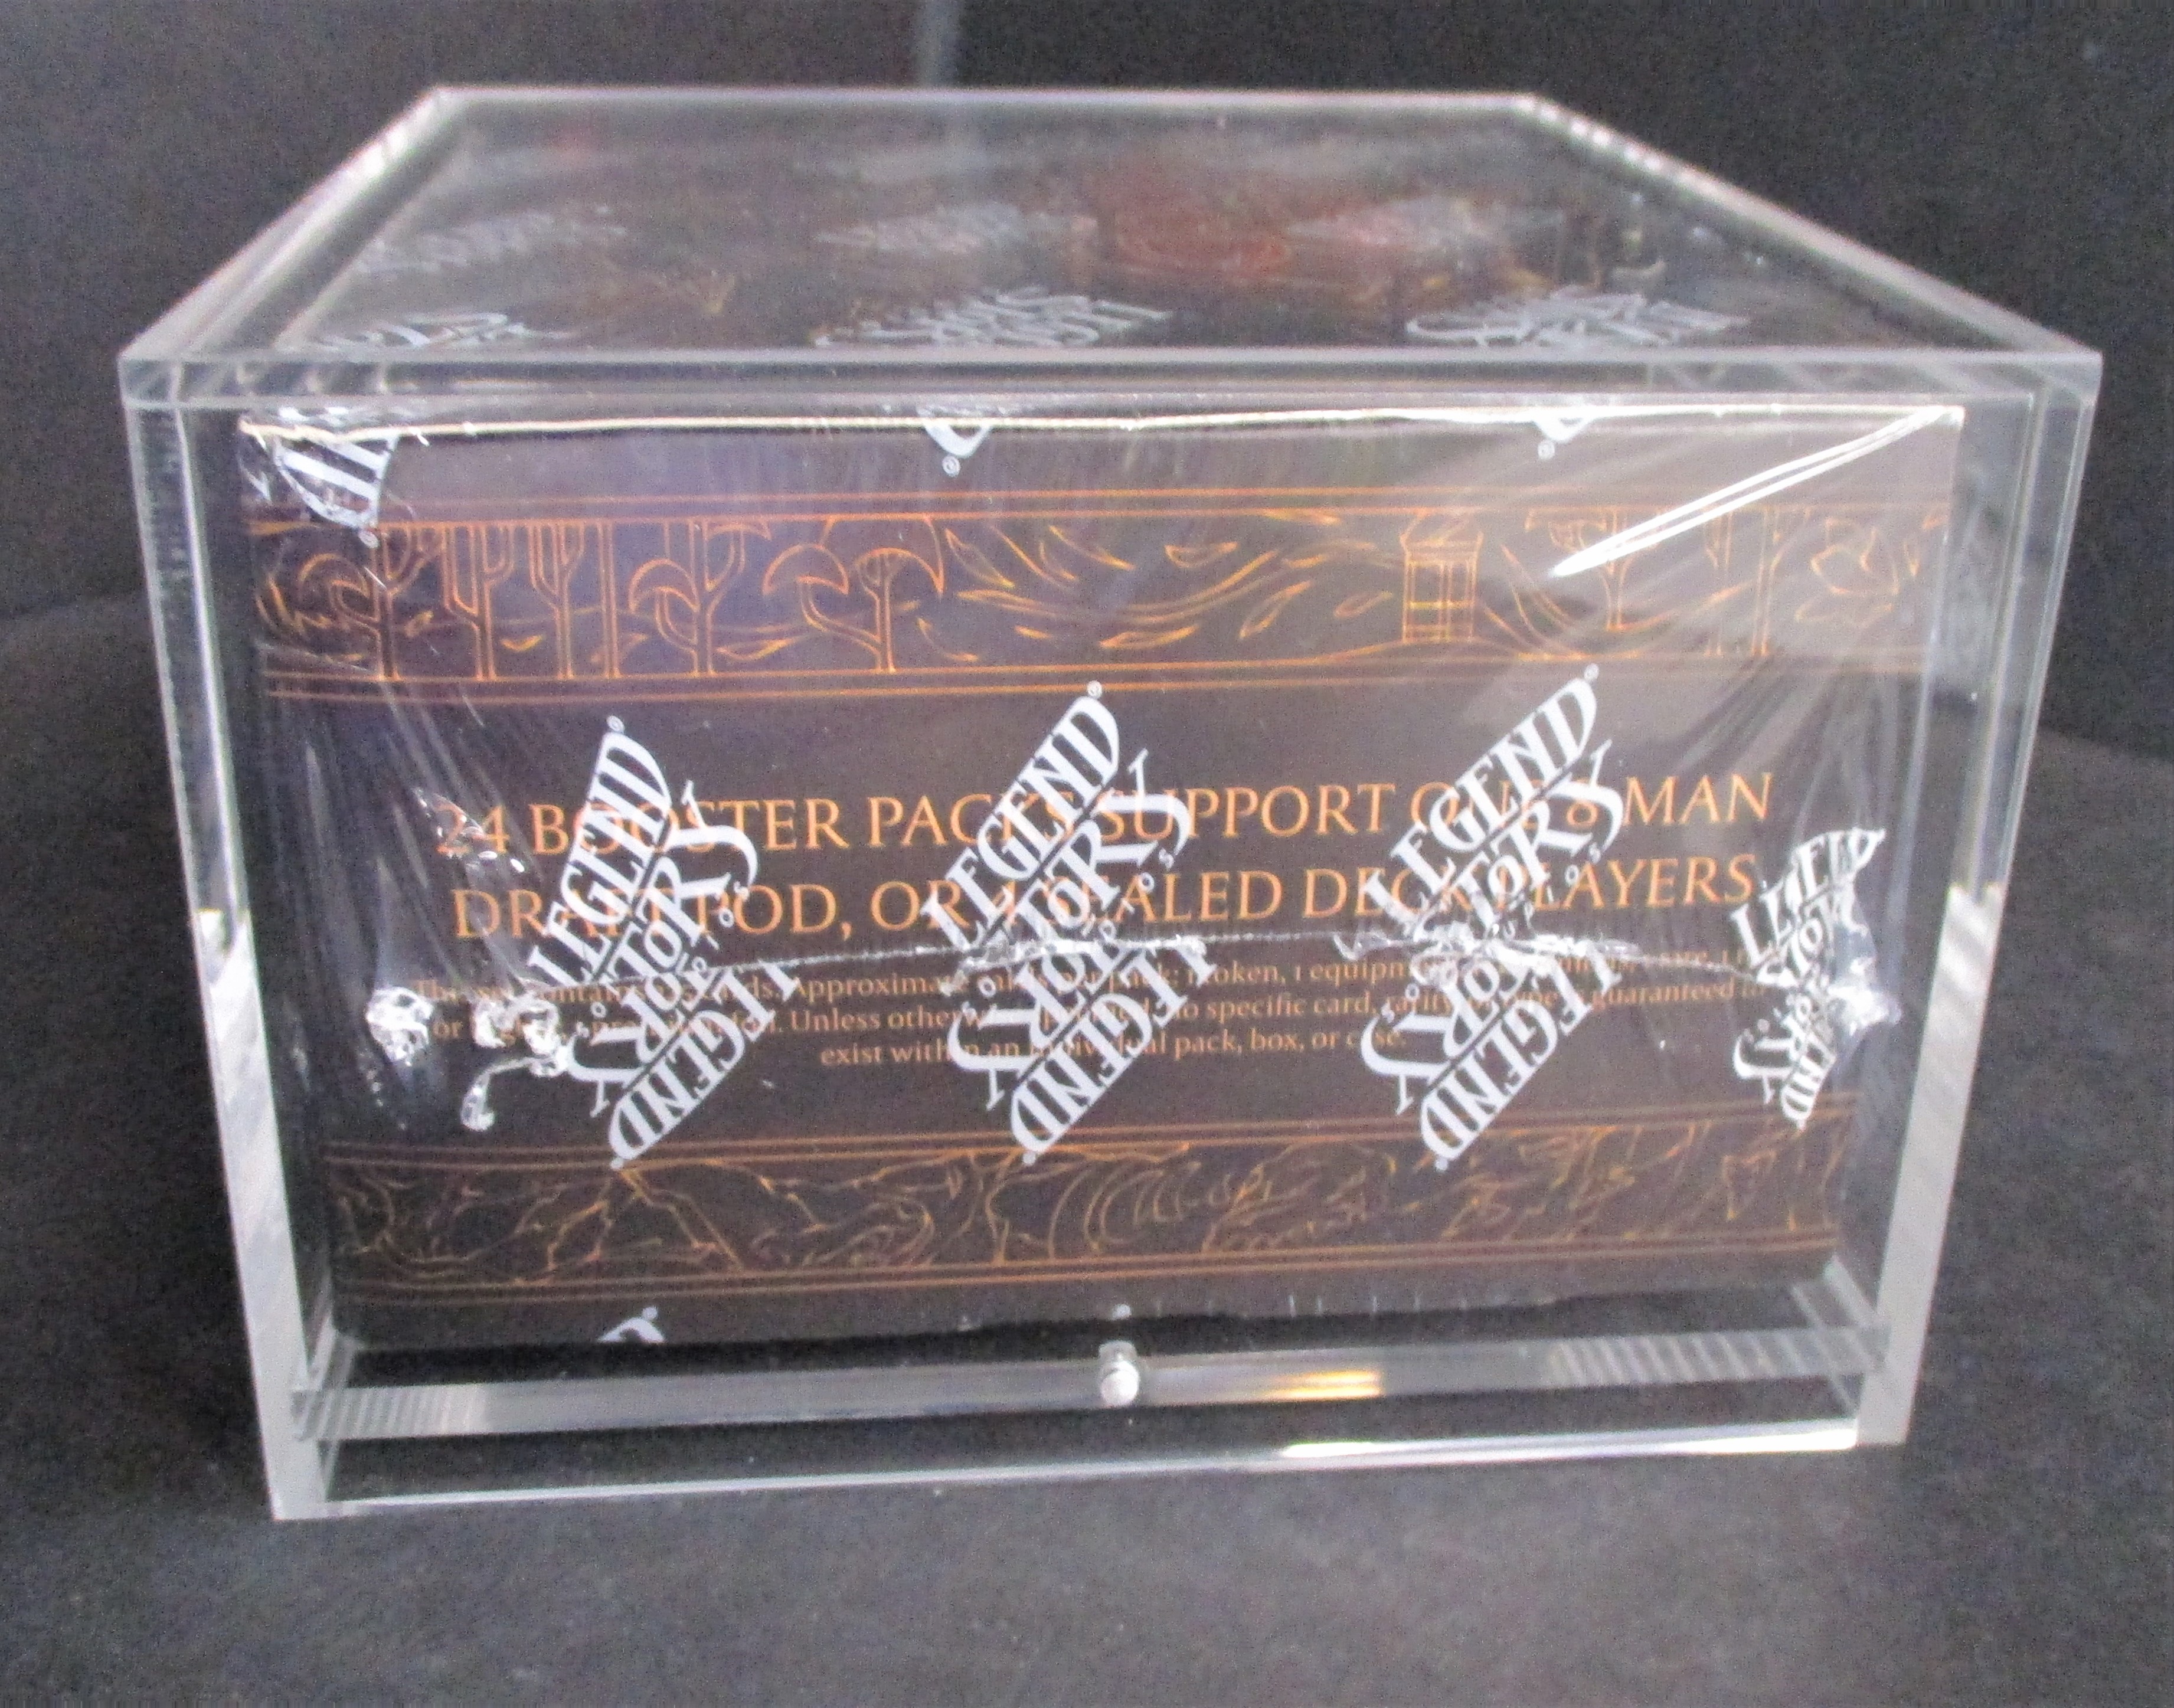 60012 Flesh and Blood 5x Acrylic Booster Box Display 